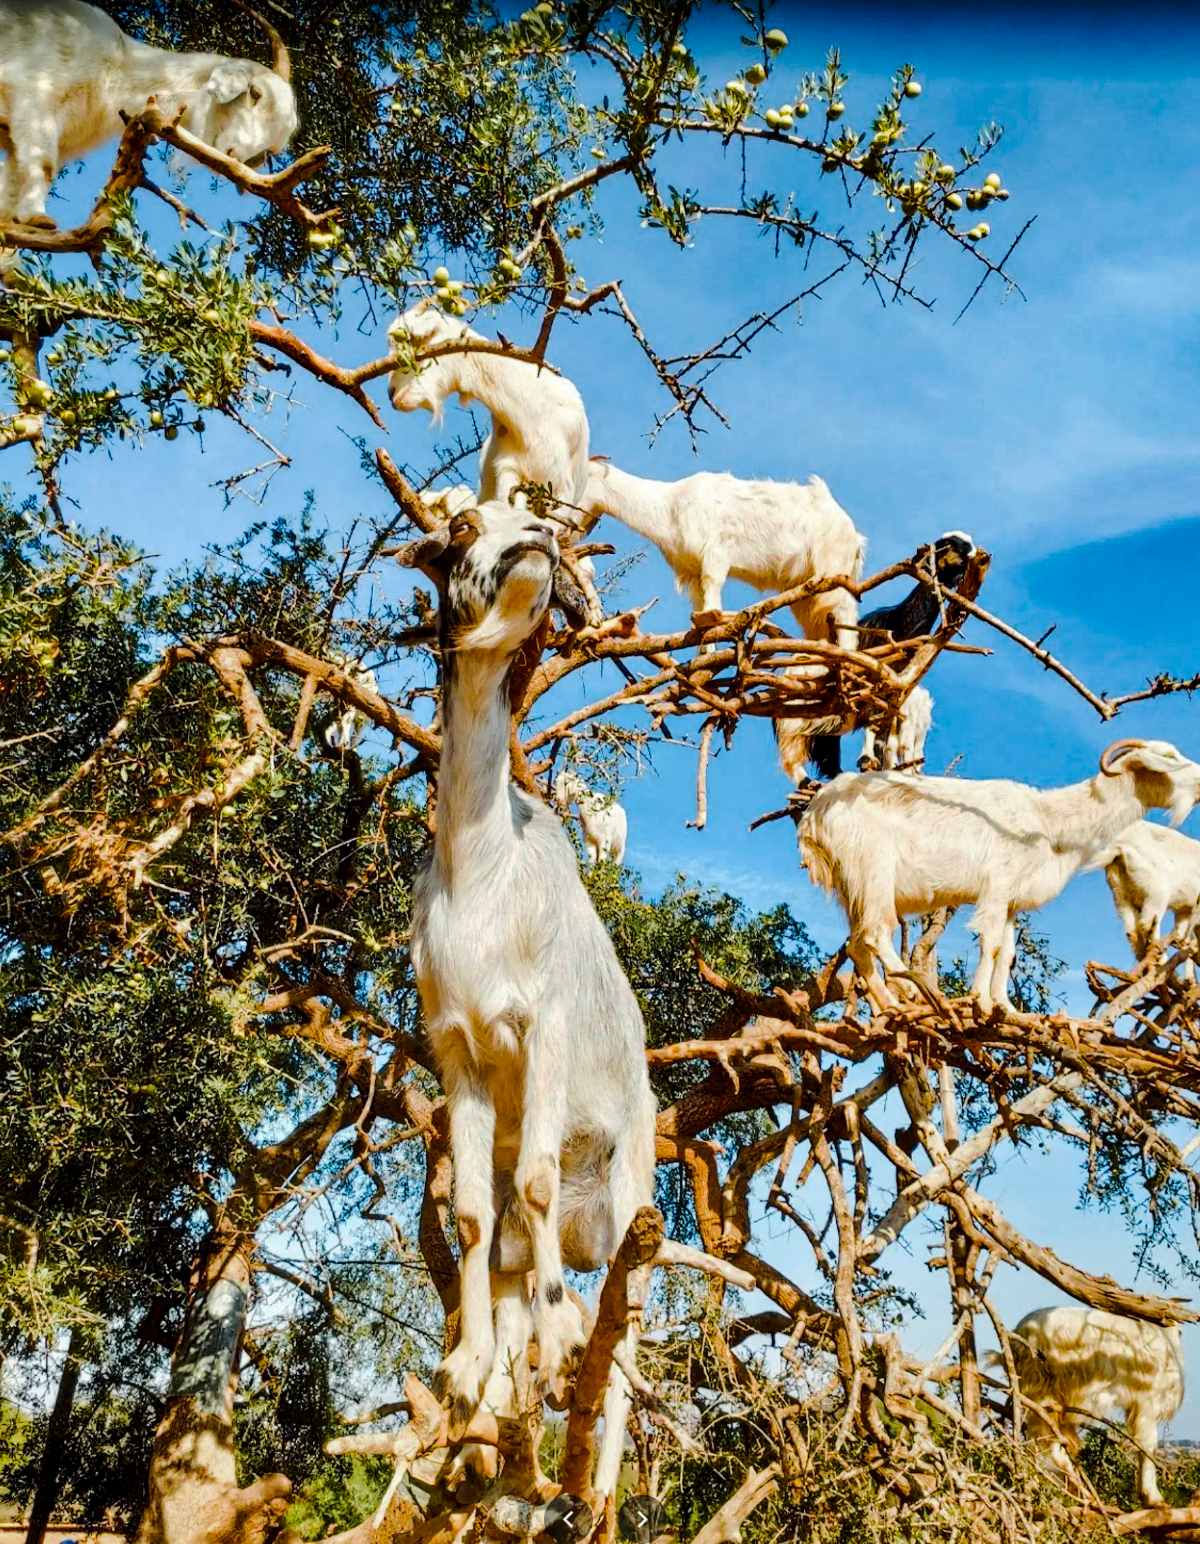 Tree climbing goats in morocco.